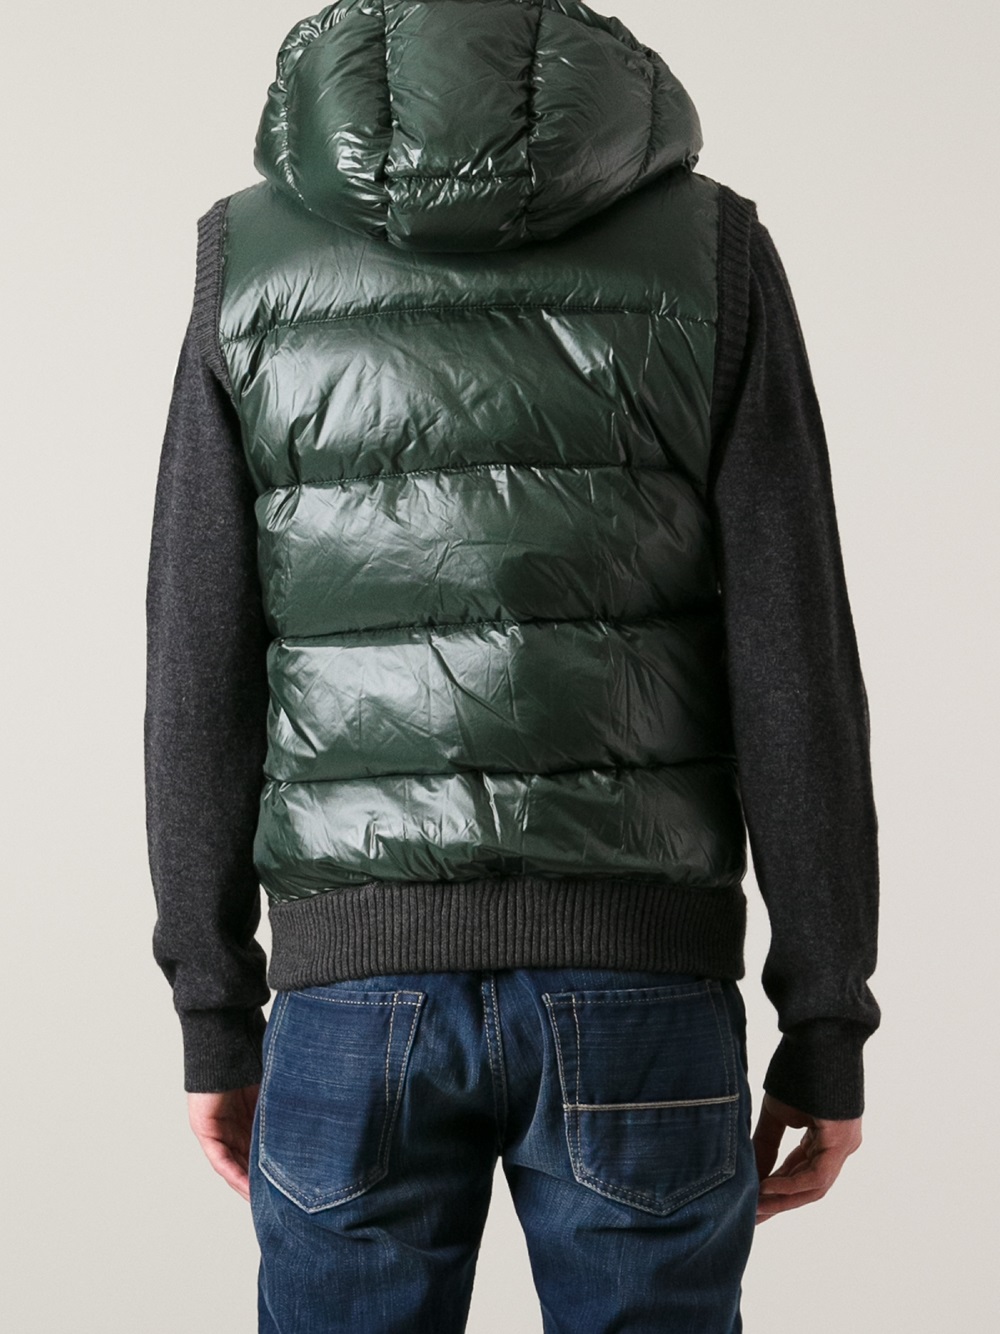 Moncler Padded Cardigan Gilet in Grey (Gray) for Men - Lyst